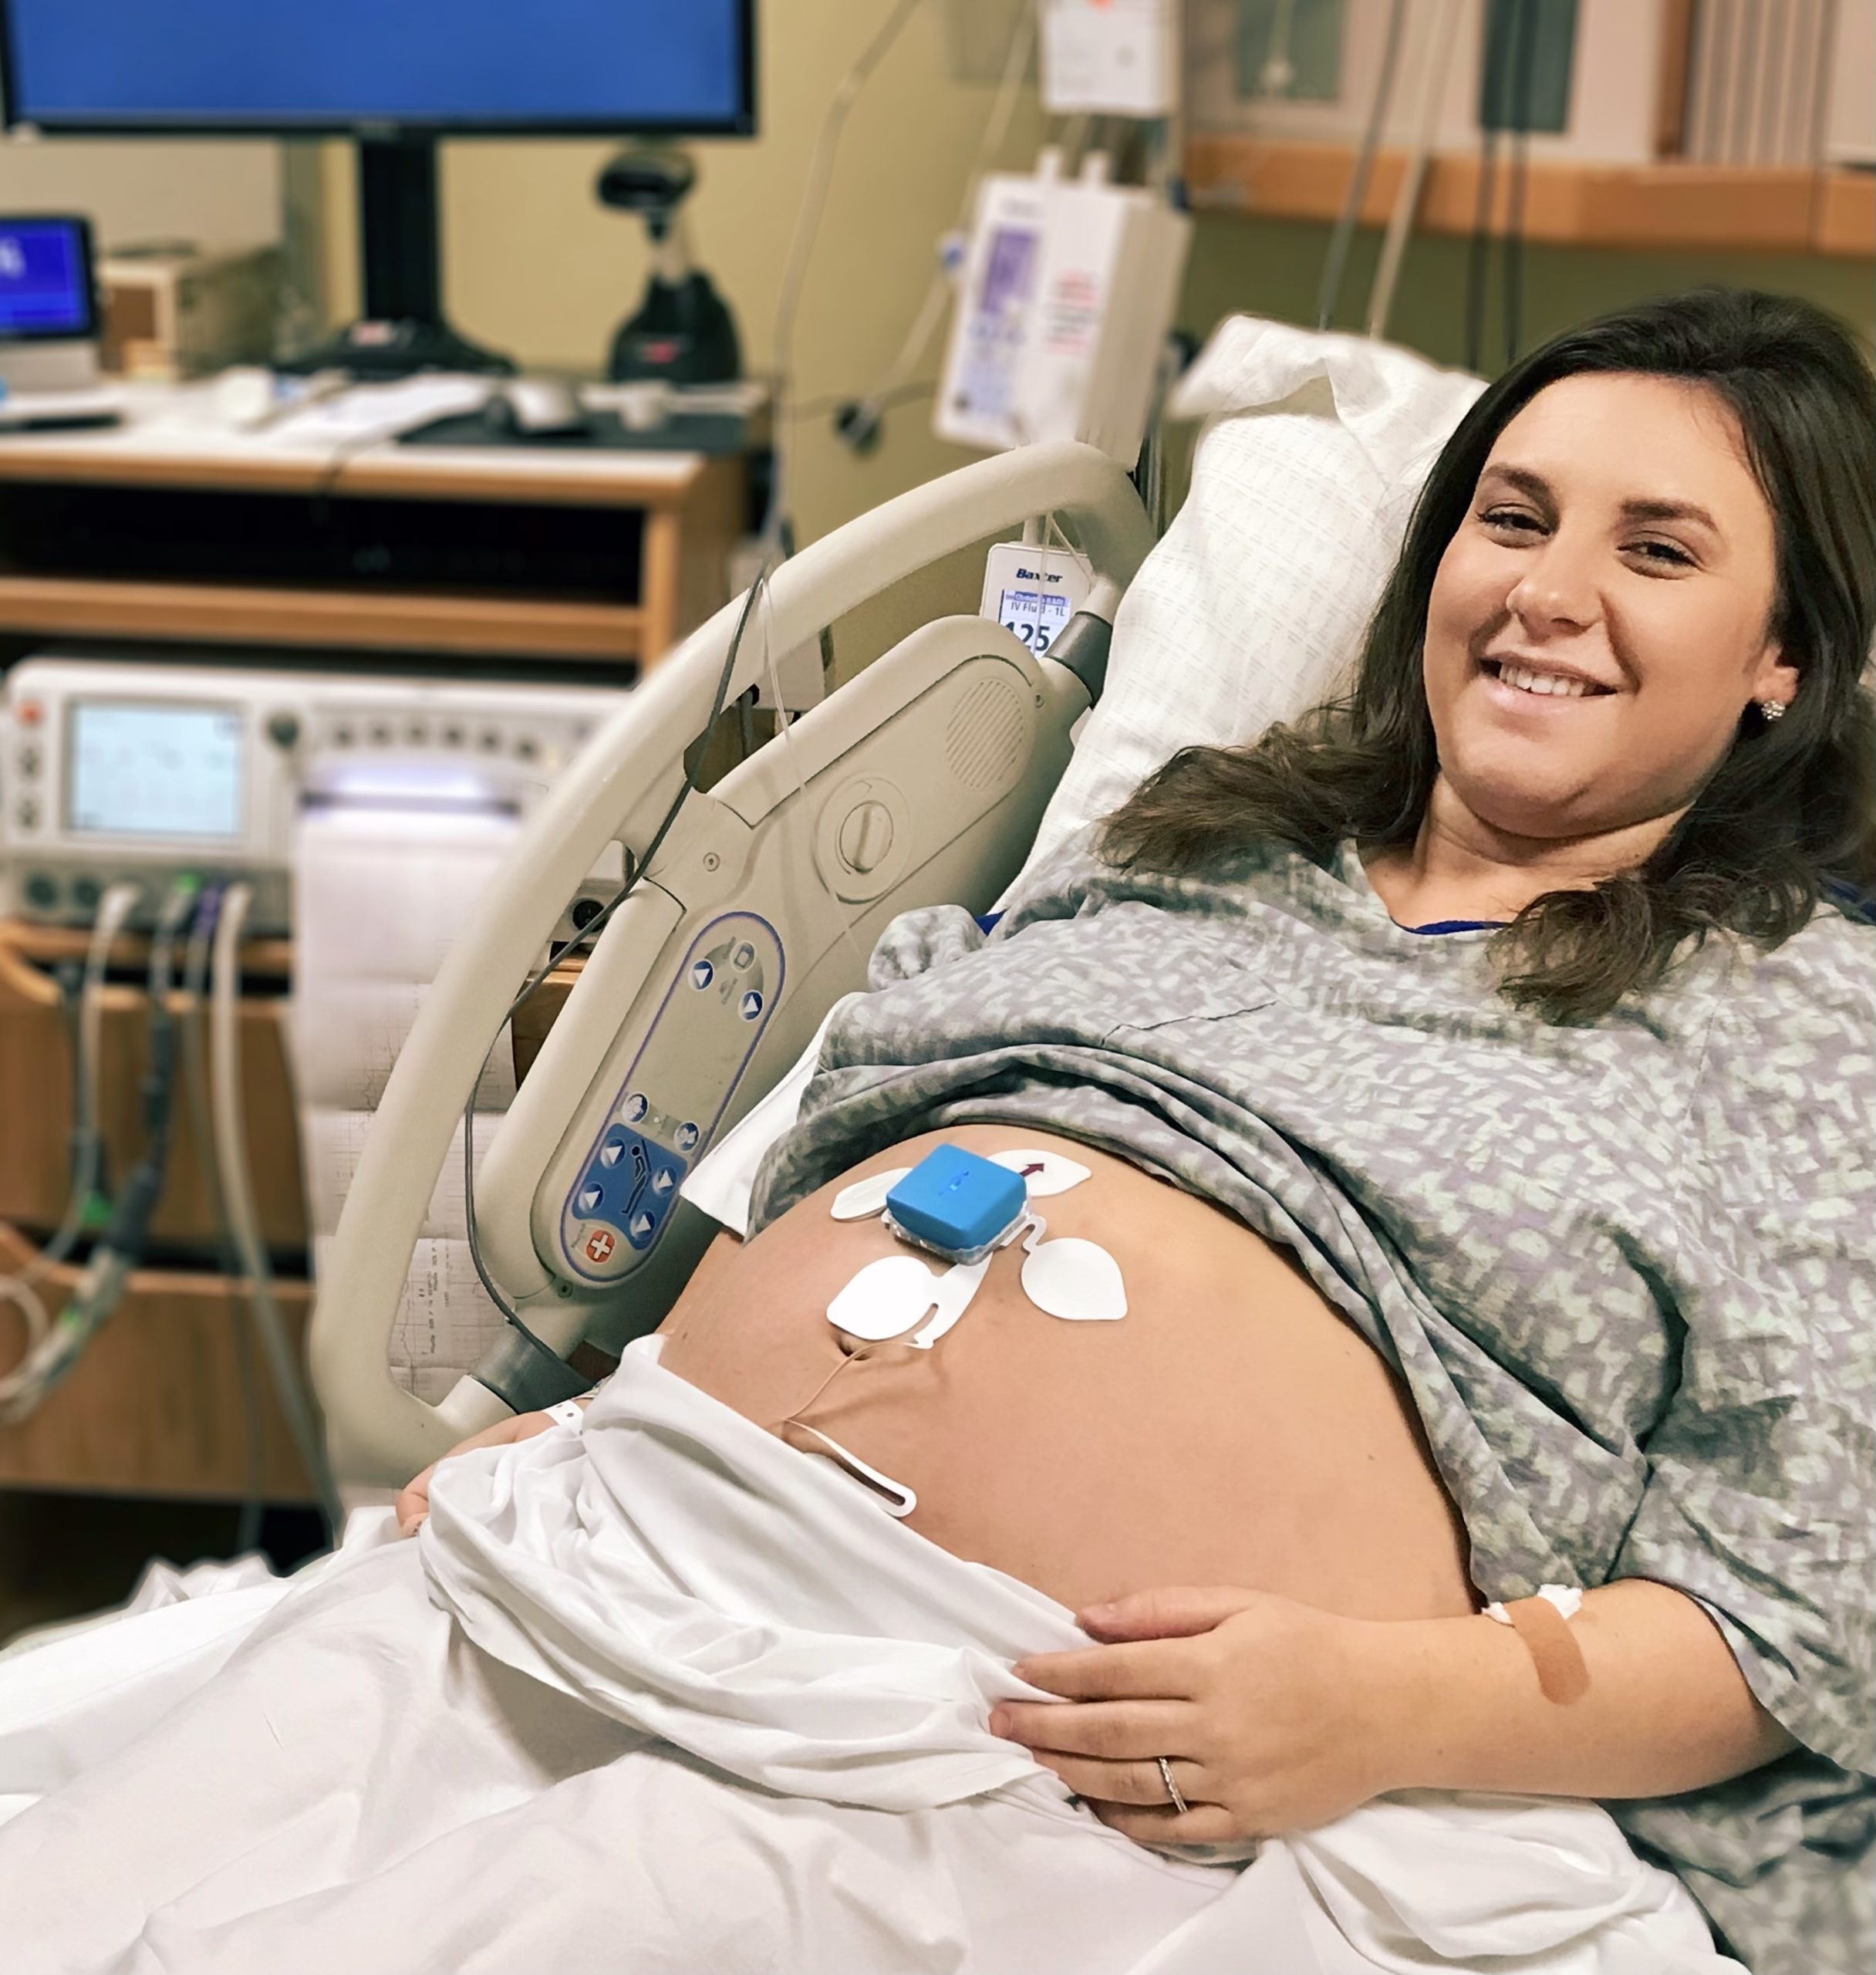 Wireless Monitoring System Improves Labor Experience at SGMC